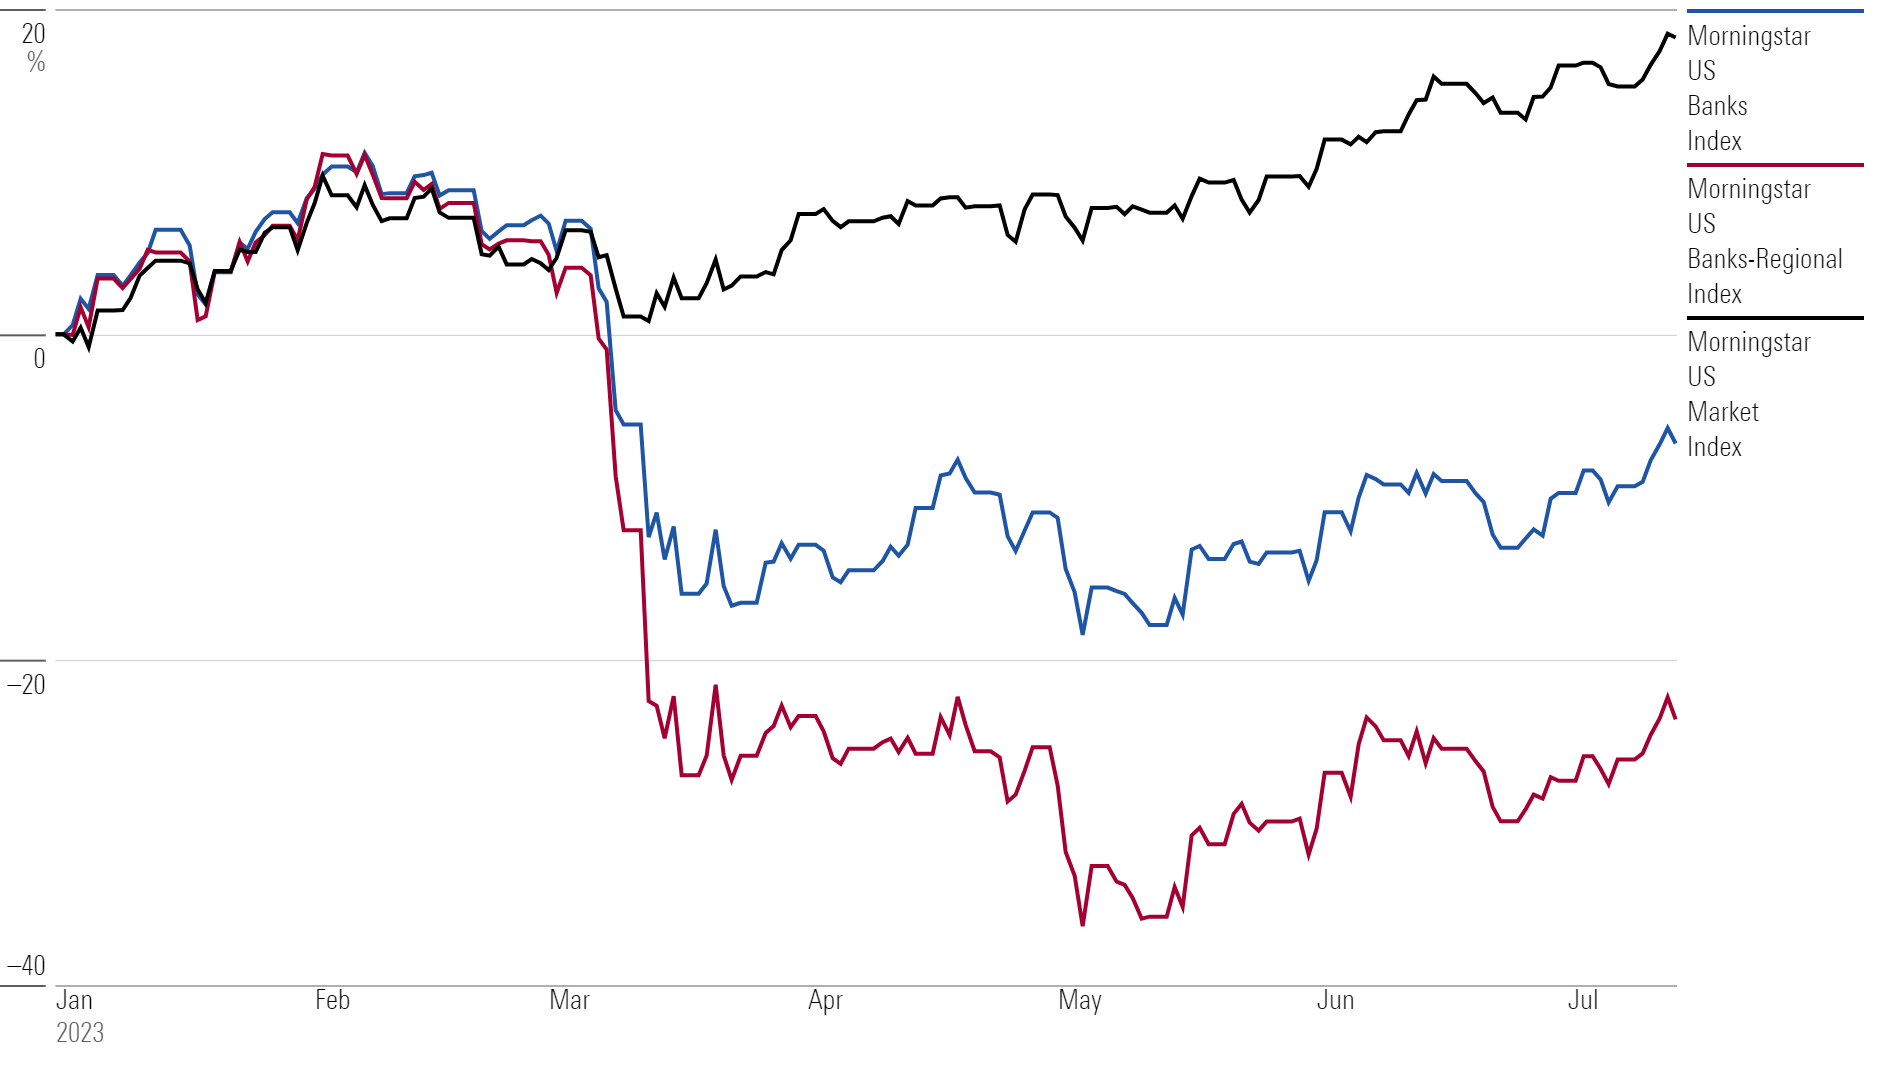 A line chart showing the performances of the Morningstar US Banks Index, Morningstar US Banks-Regional Index, and Morningstar US Market Index from Jan. 1, 2023, to July 14, 2023.